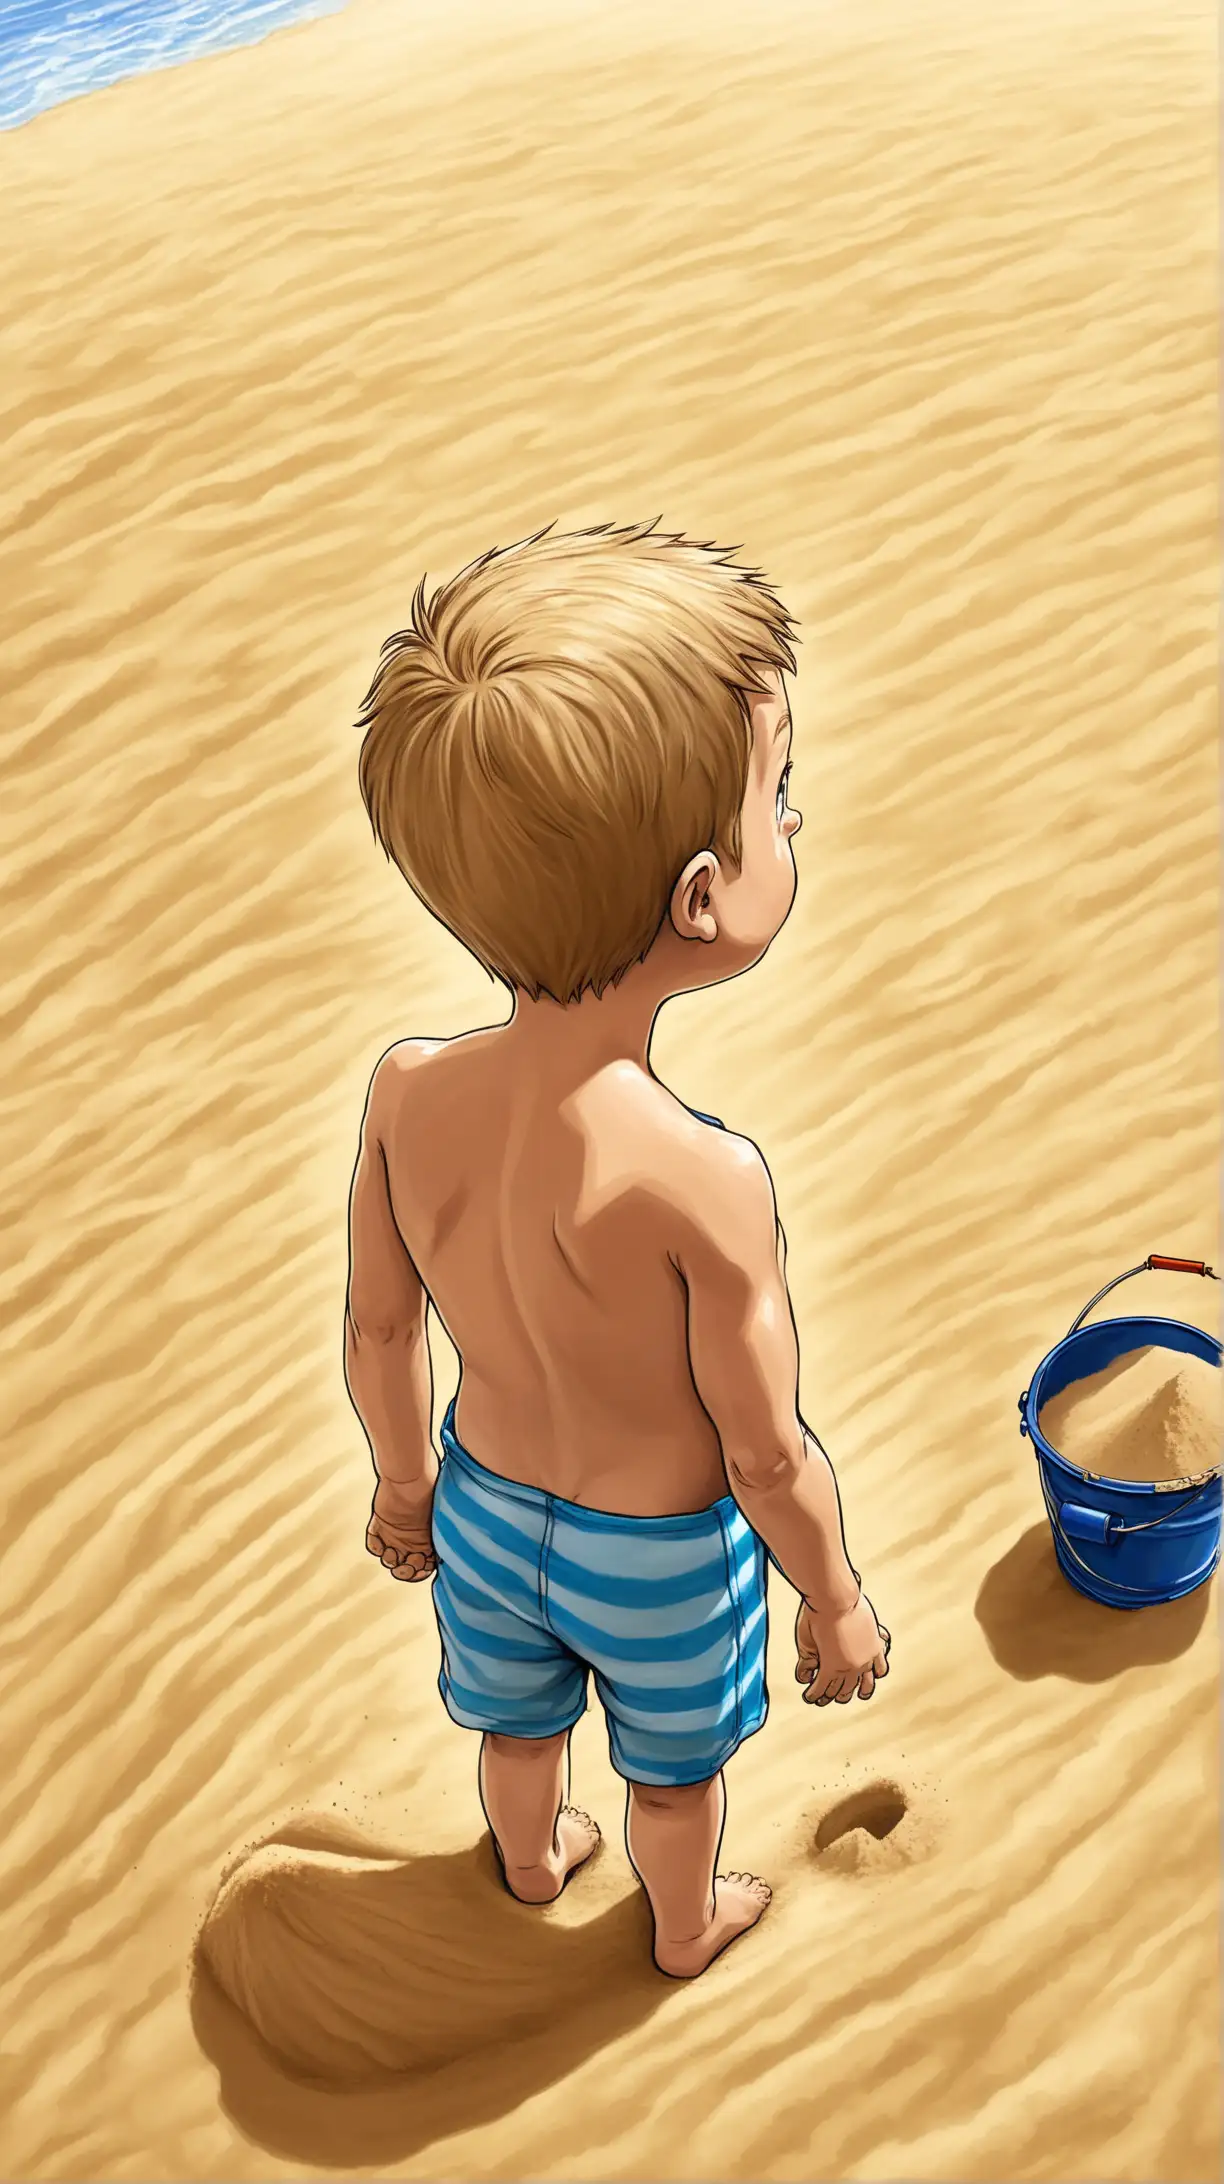 Boy Building Sandcastle on Beach with Pail and Shovel